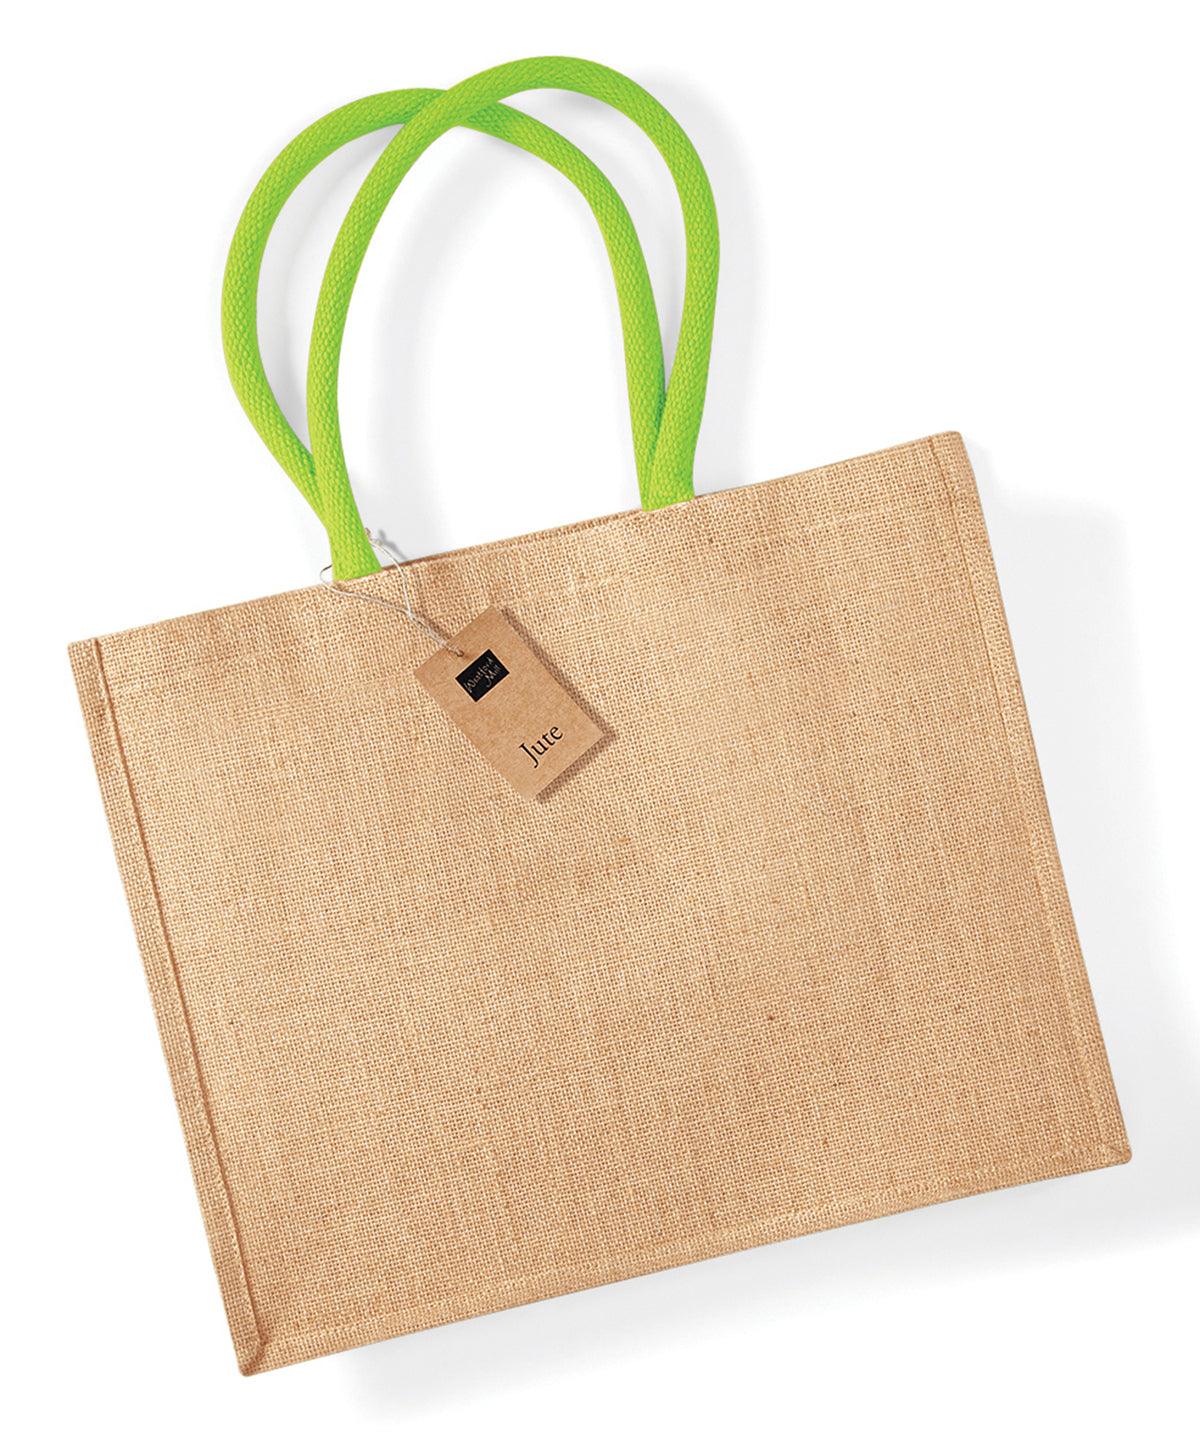 Natural/Lime Green - Jute classic shopper Bags Westford Mill Bags & Luggage, Must Haves Schoolwear Centres